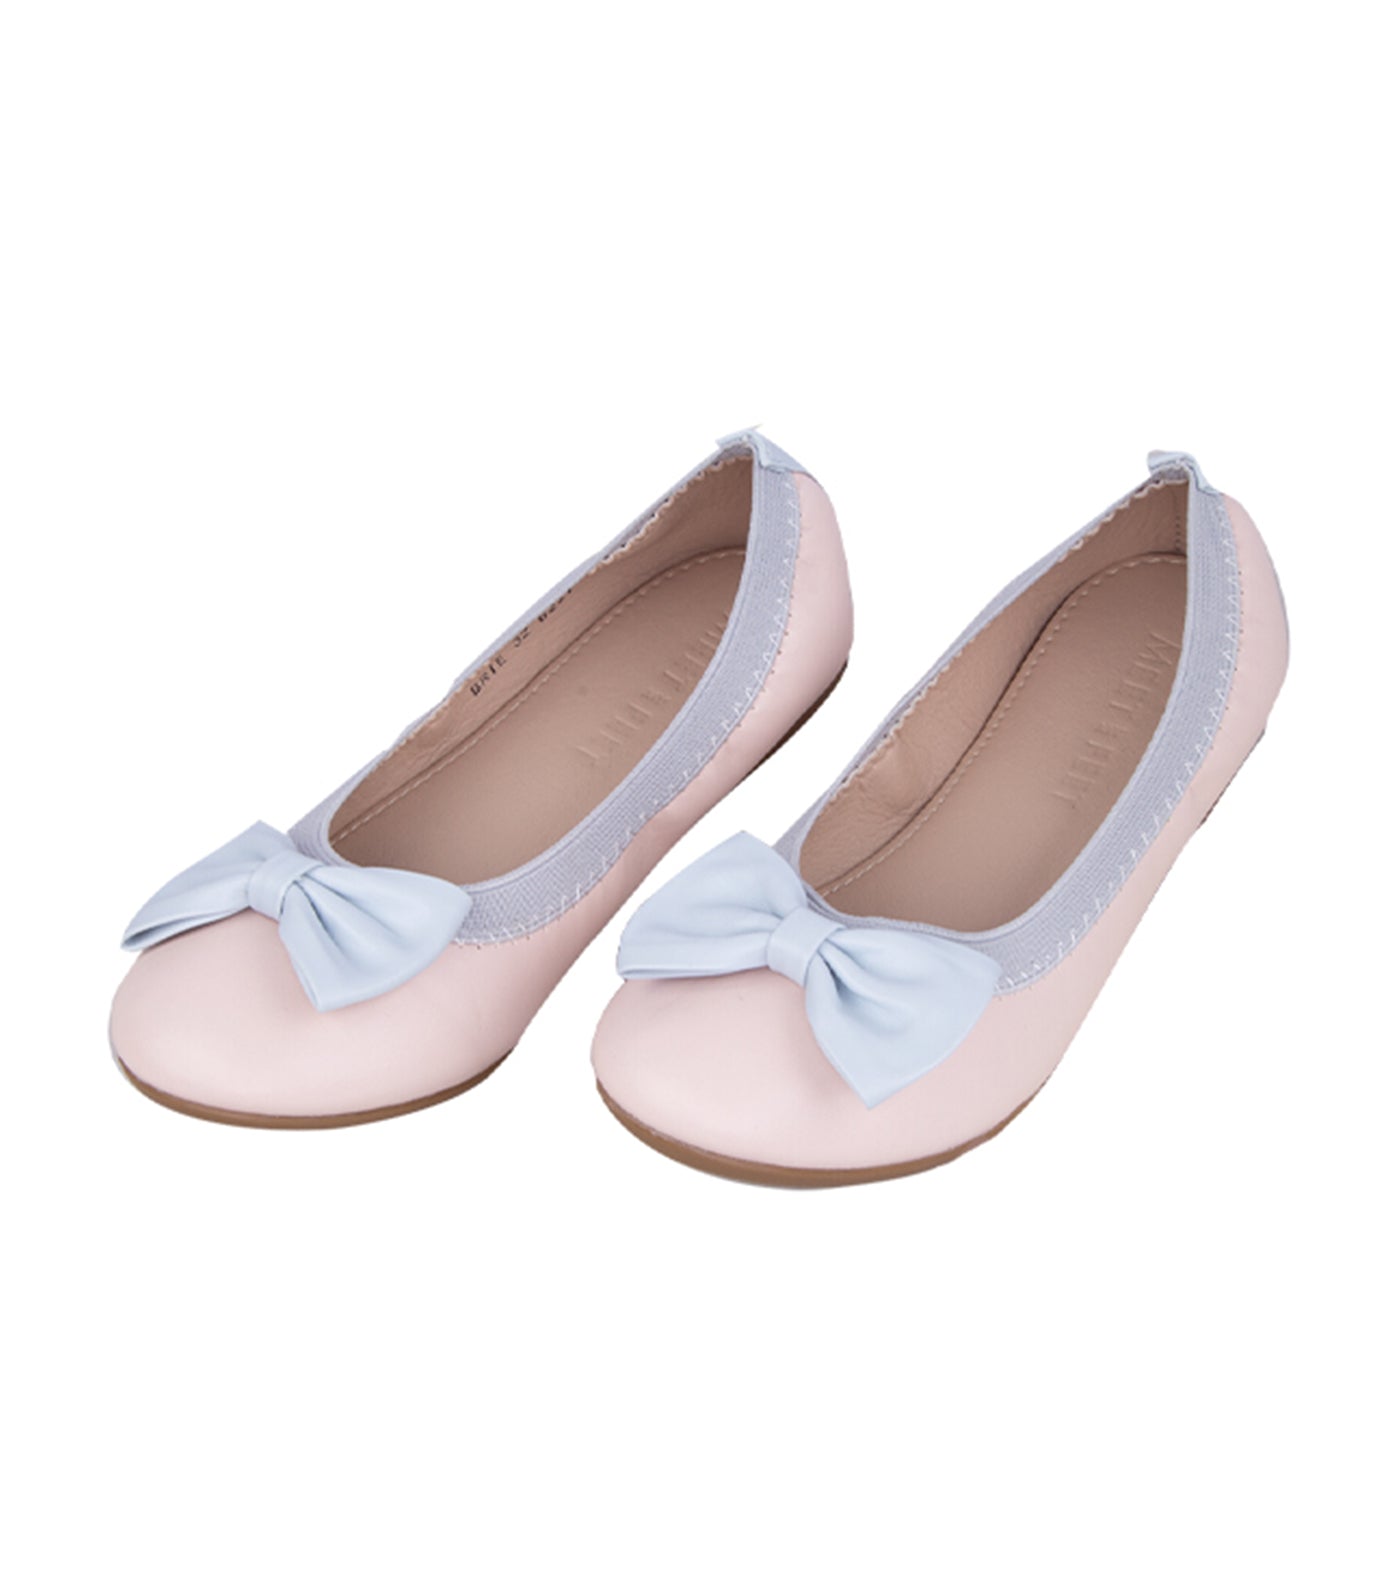 Brie Kids Flats for Girls - Pink